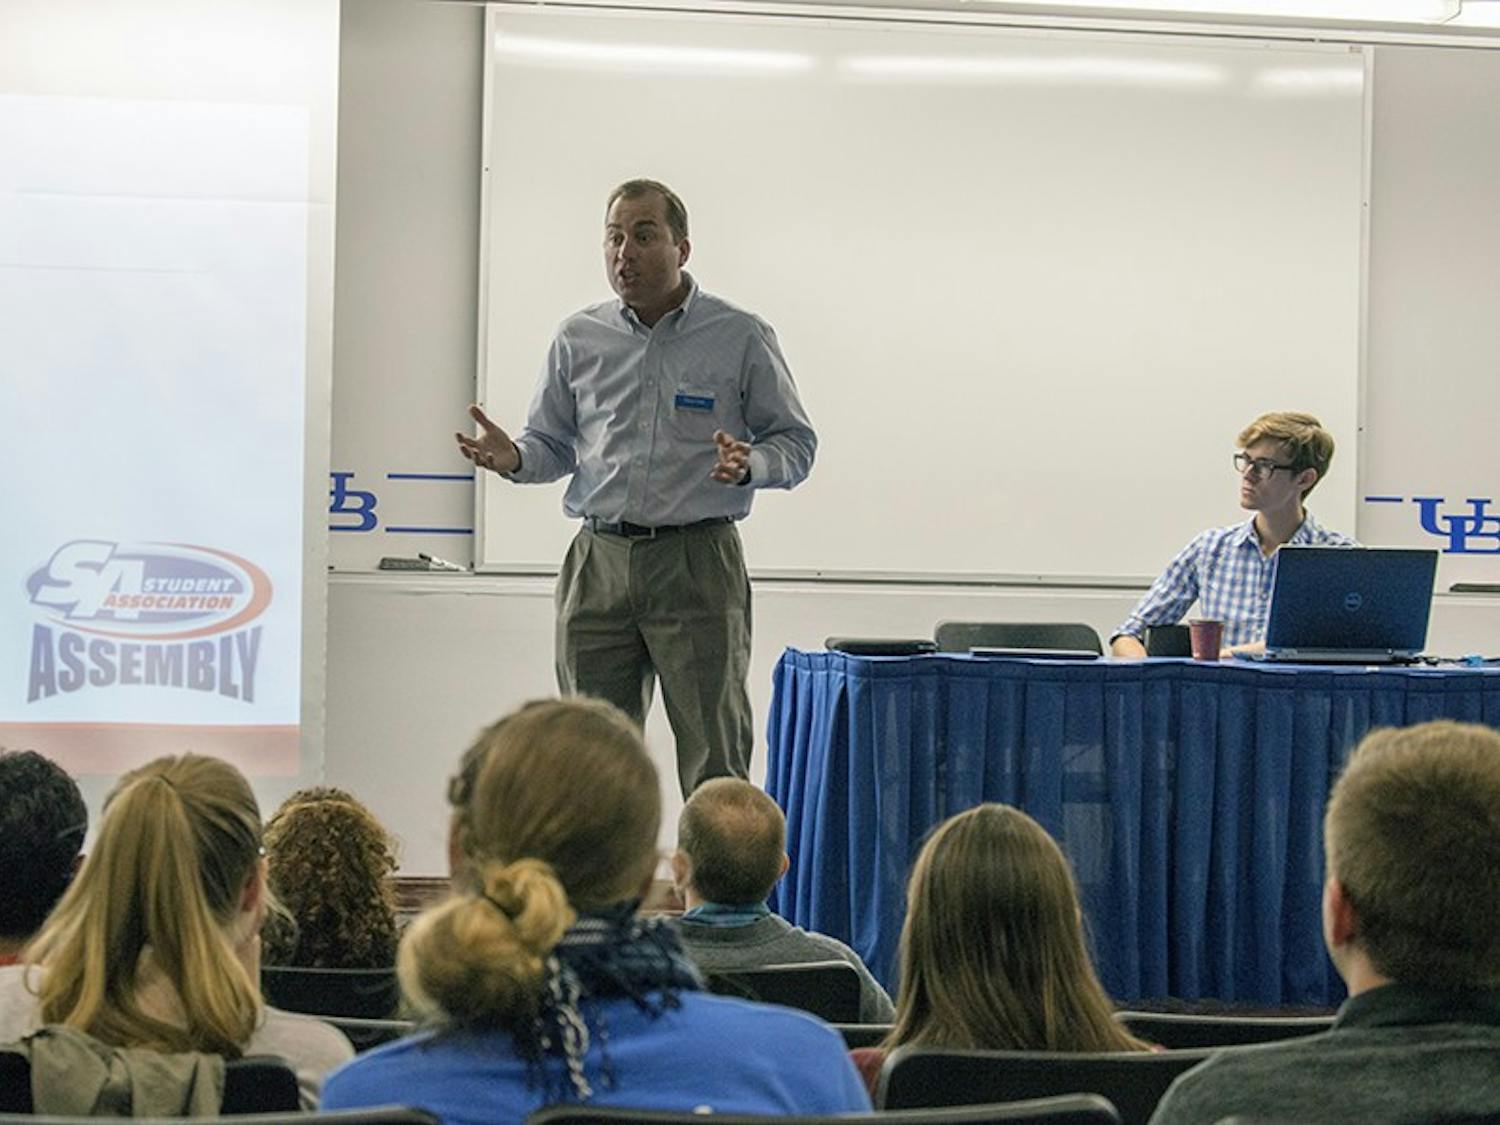 Chris Clune (middle), director of UBIT customer service, speaks during Wednesday's Student Association Assembly meeting as Speaker James Corra (far right) listens. It was SA Assembly's first meeting of the semester. 